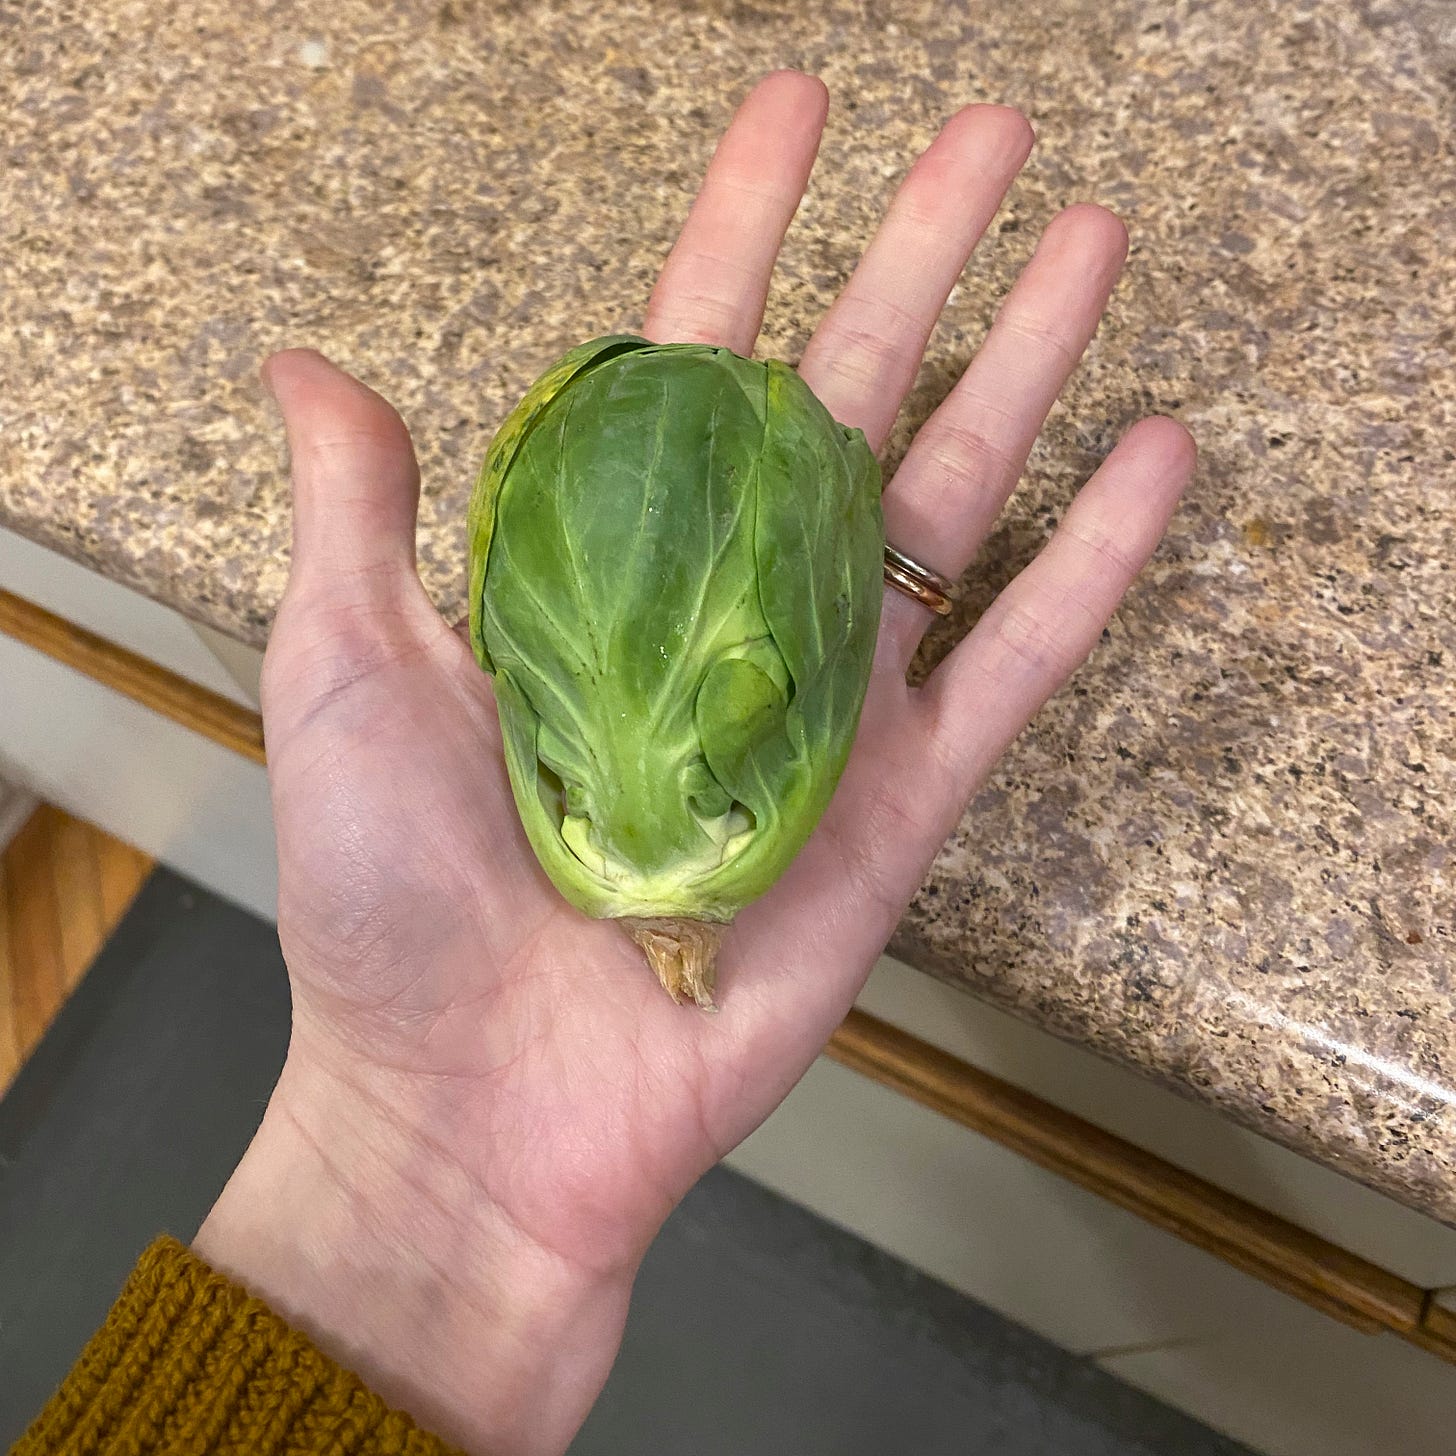 My hand holding a brussels sprout that is large enough to fill my entire palm.